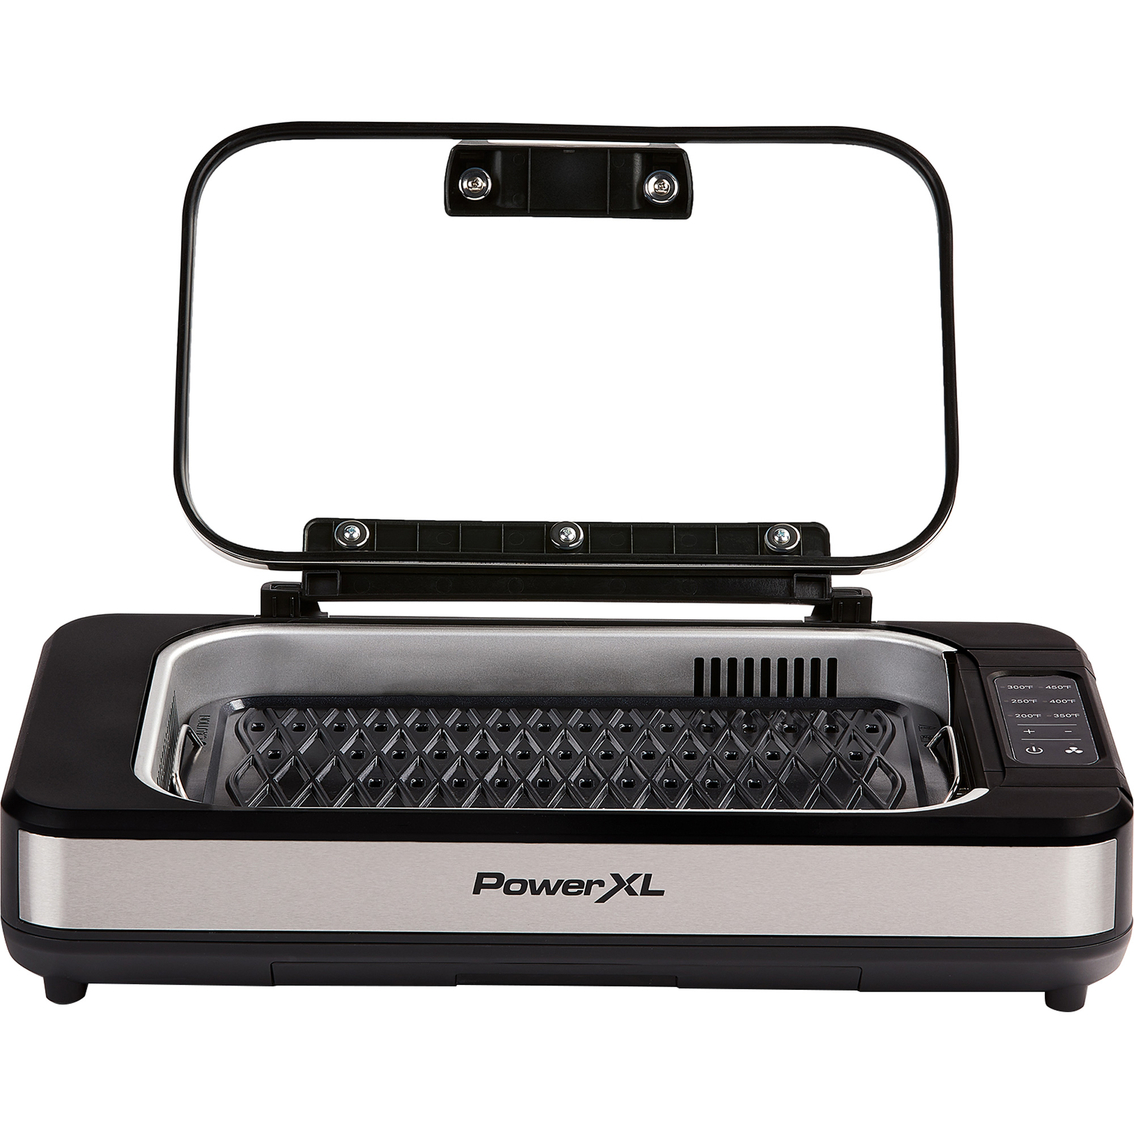 Say Hello to Year-Round Indoor Grilling with the PowerXL Smokeless Grill